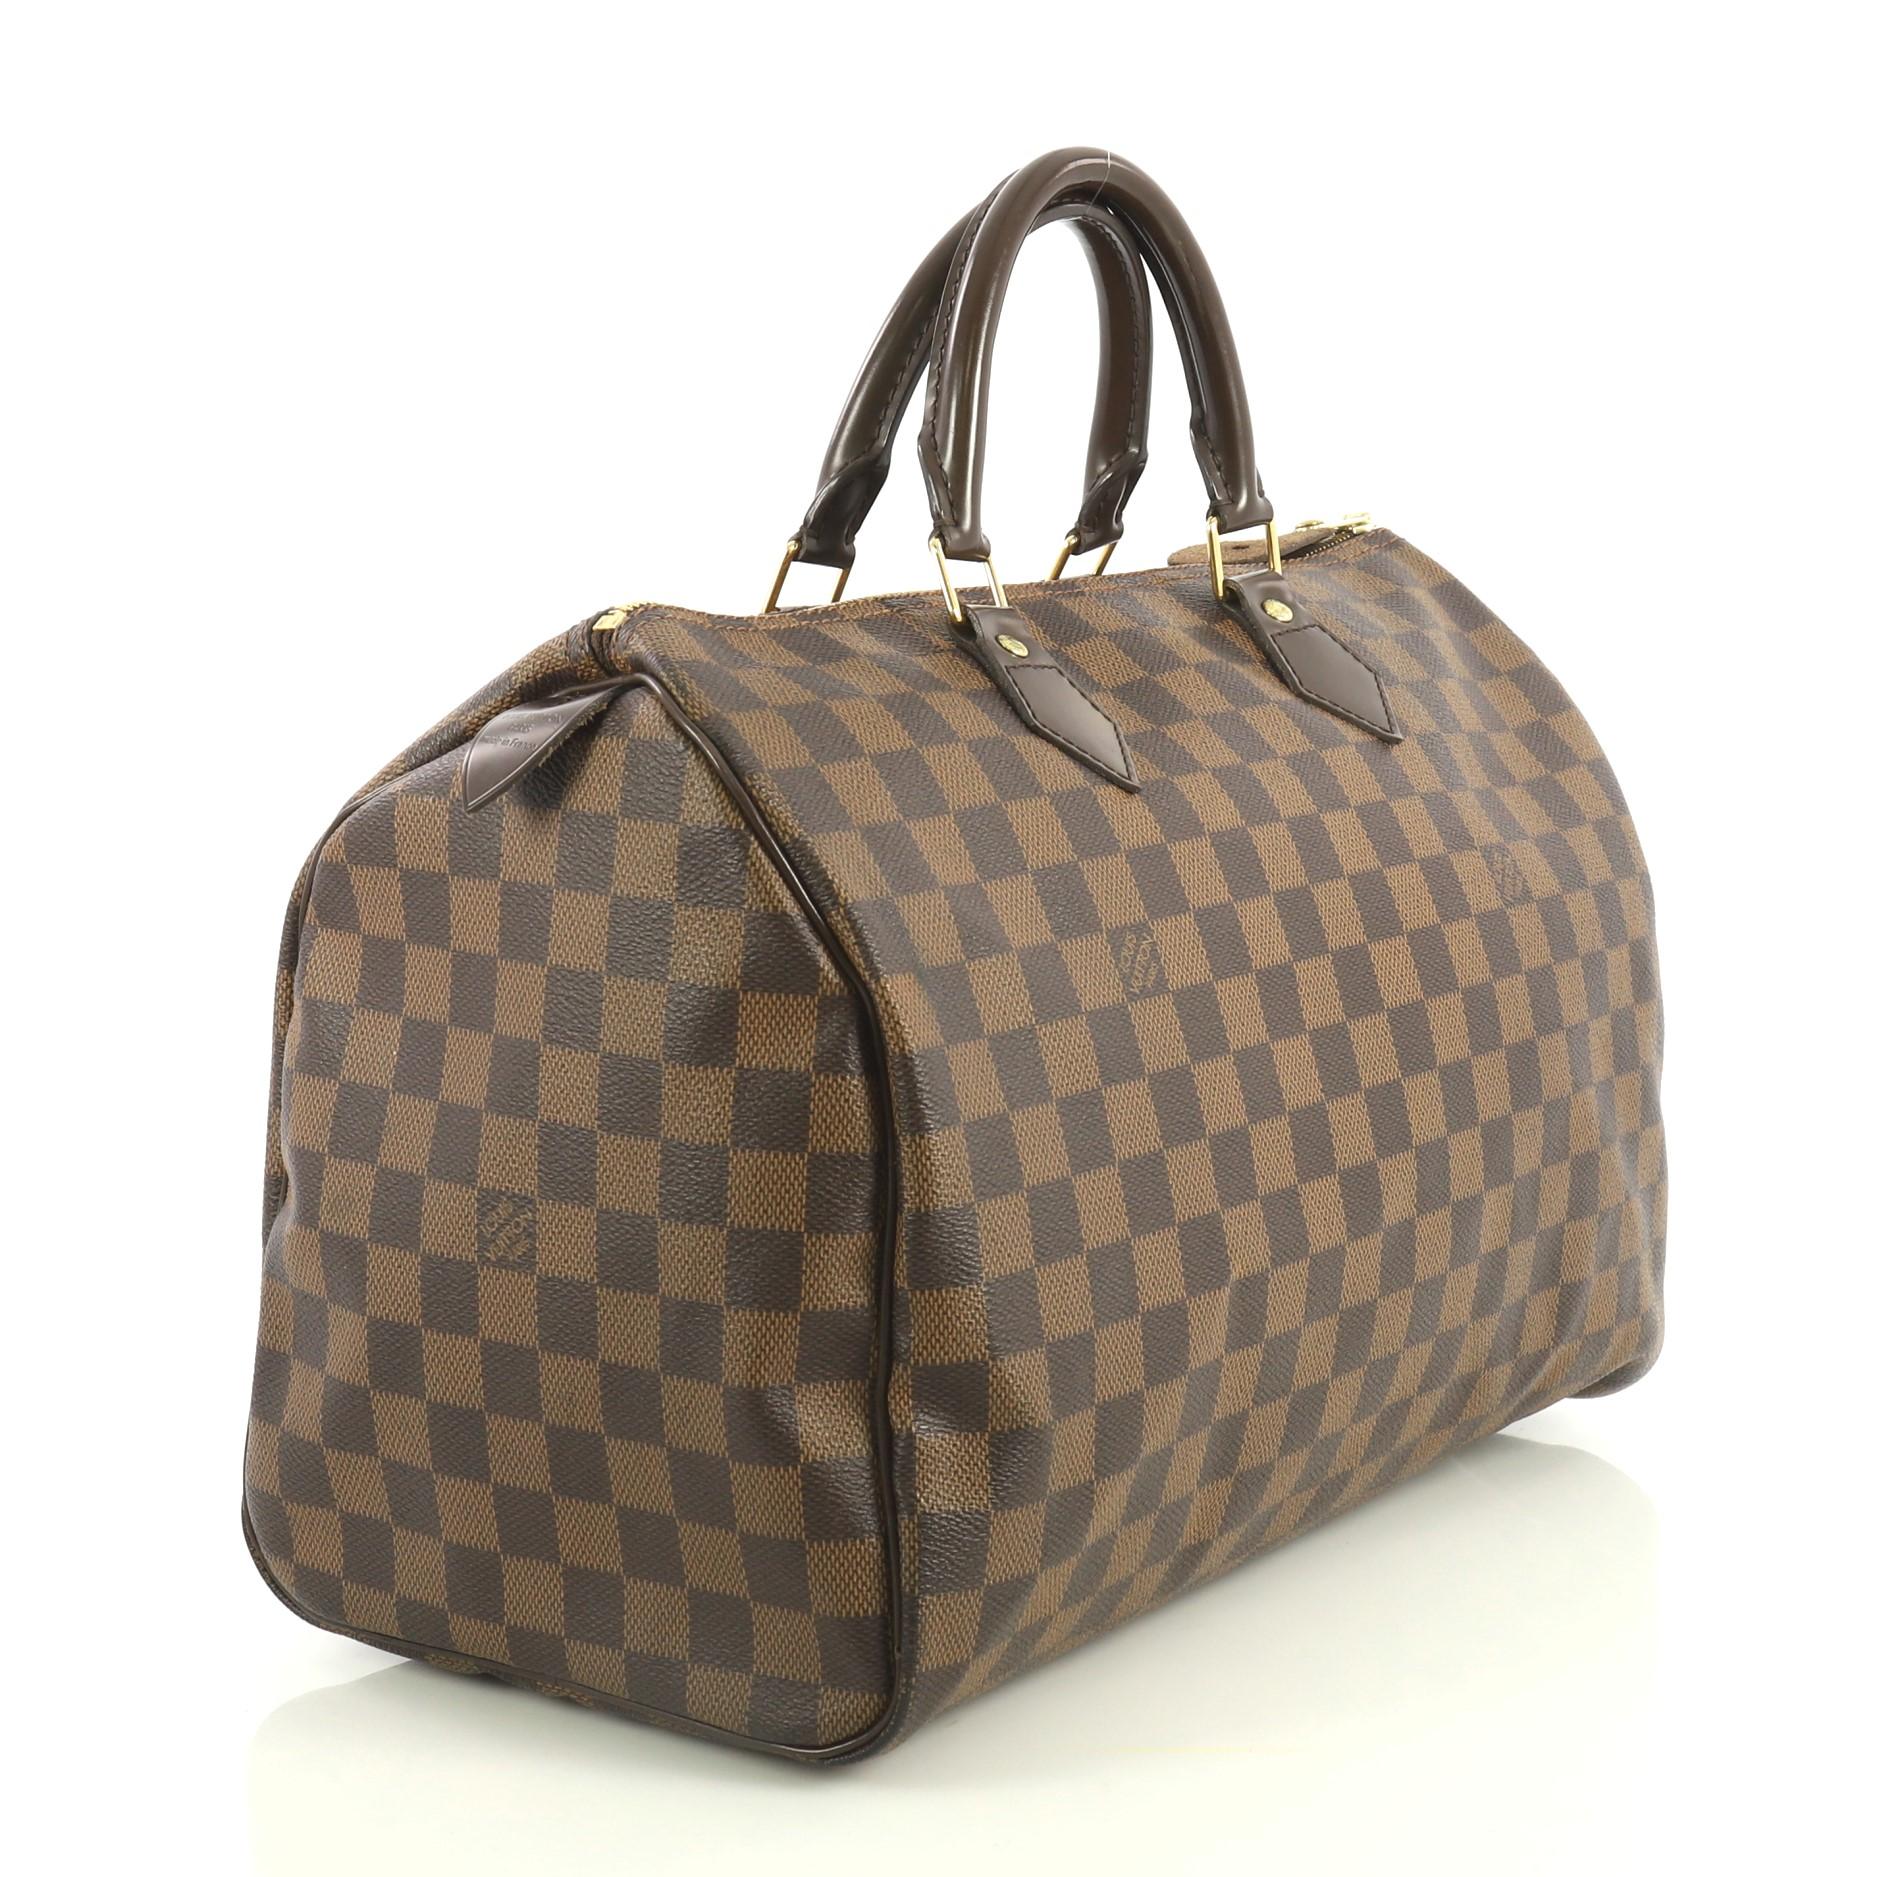 This Louis Vuitton Speedy Handbag Damier 35, crafted in damier ebene coated canvas, features dual rolled handles, leather trim and gold-tone hardware. Its zip closure opens to a red fabric interior with slip pocket. Authenticity code reads: TR4153.